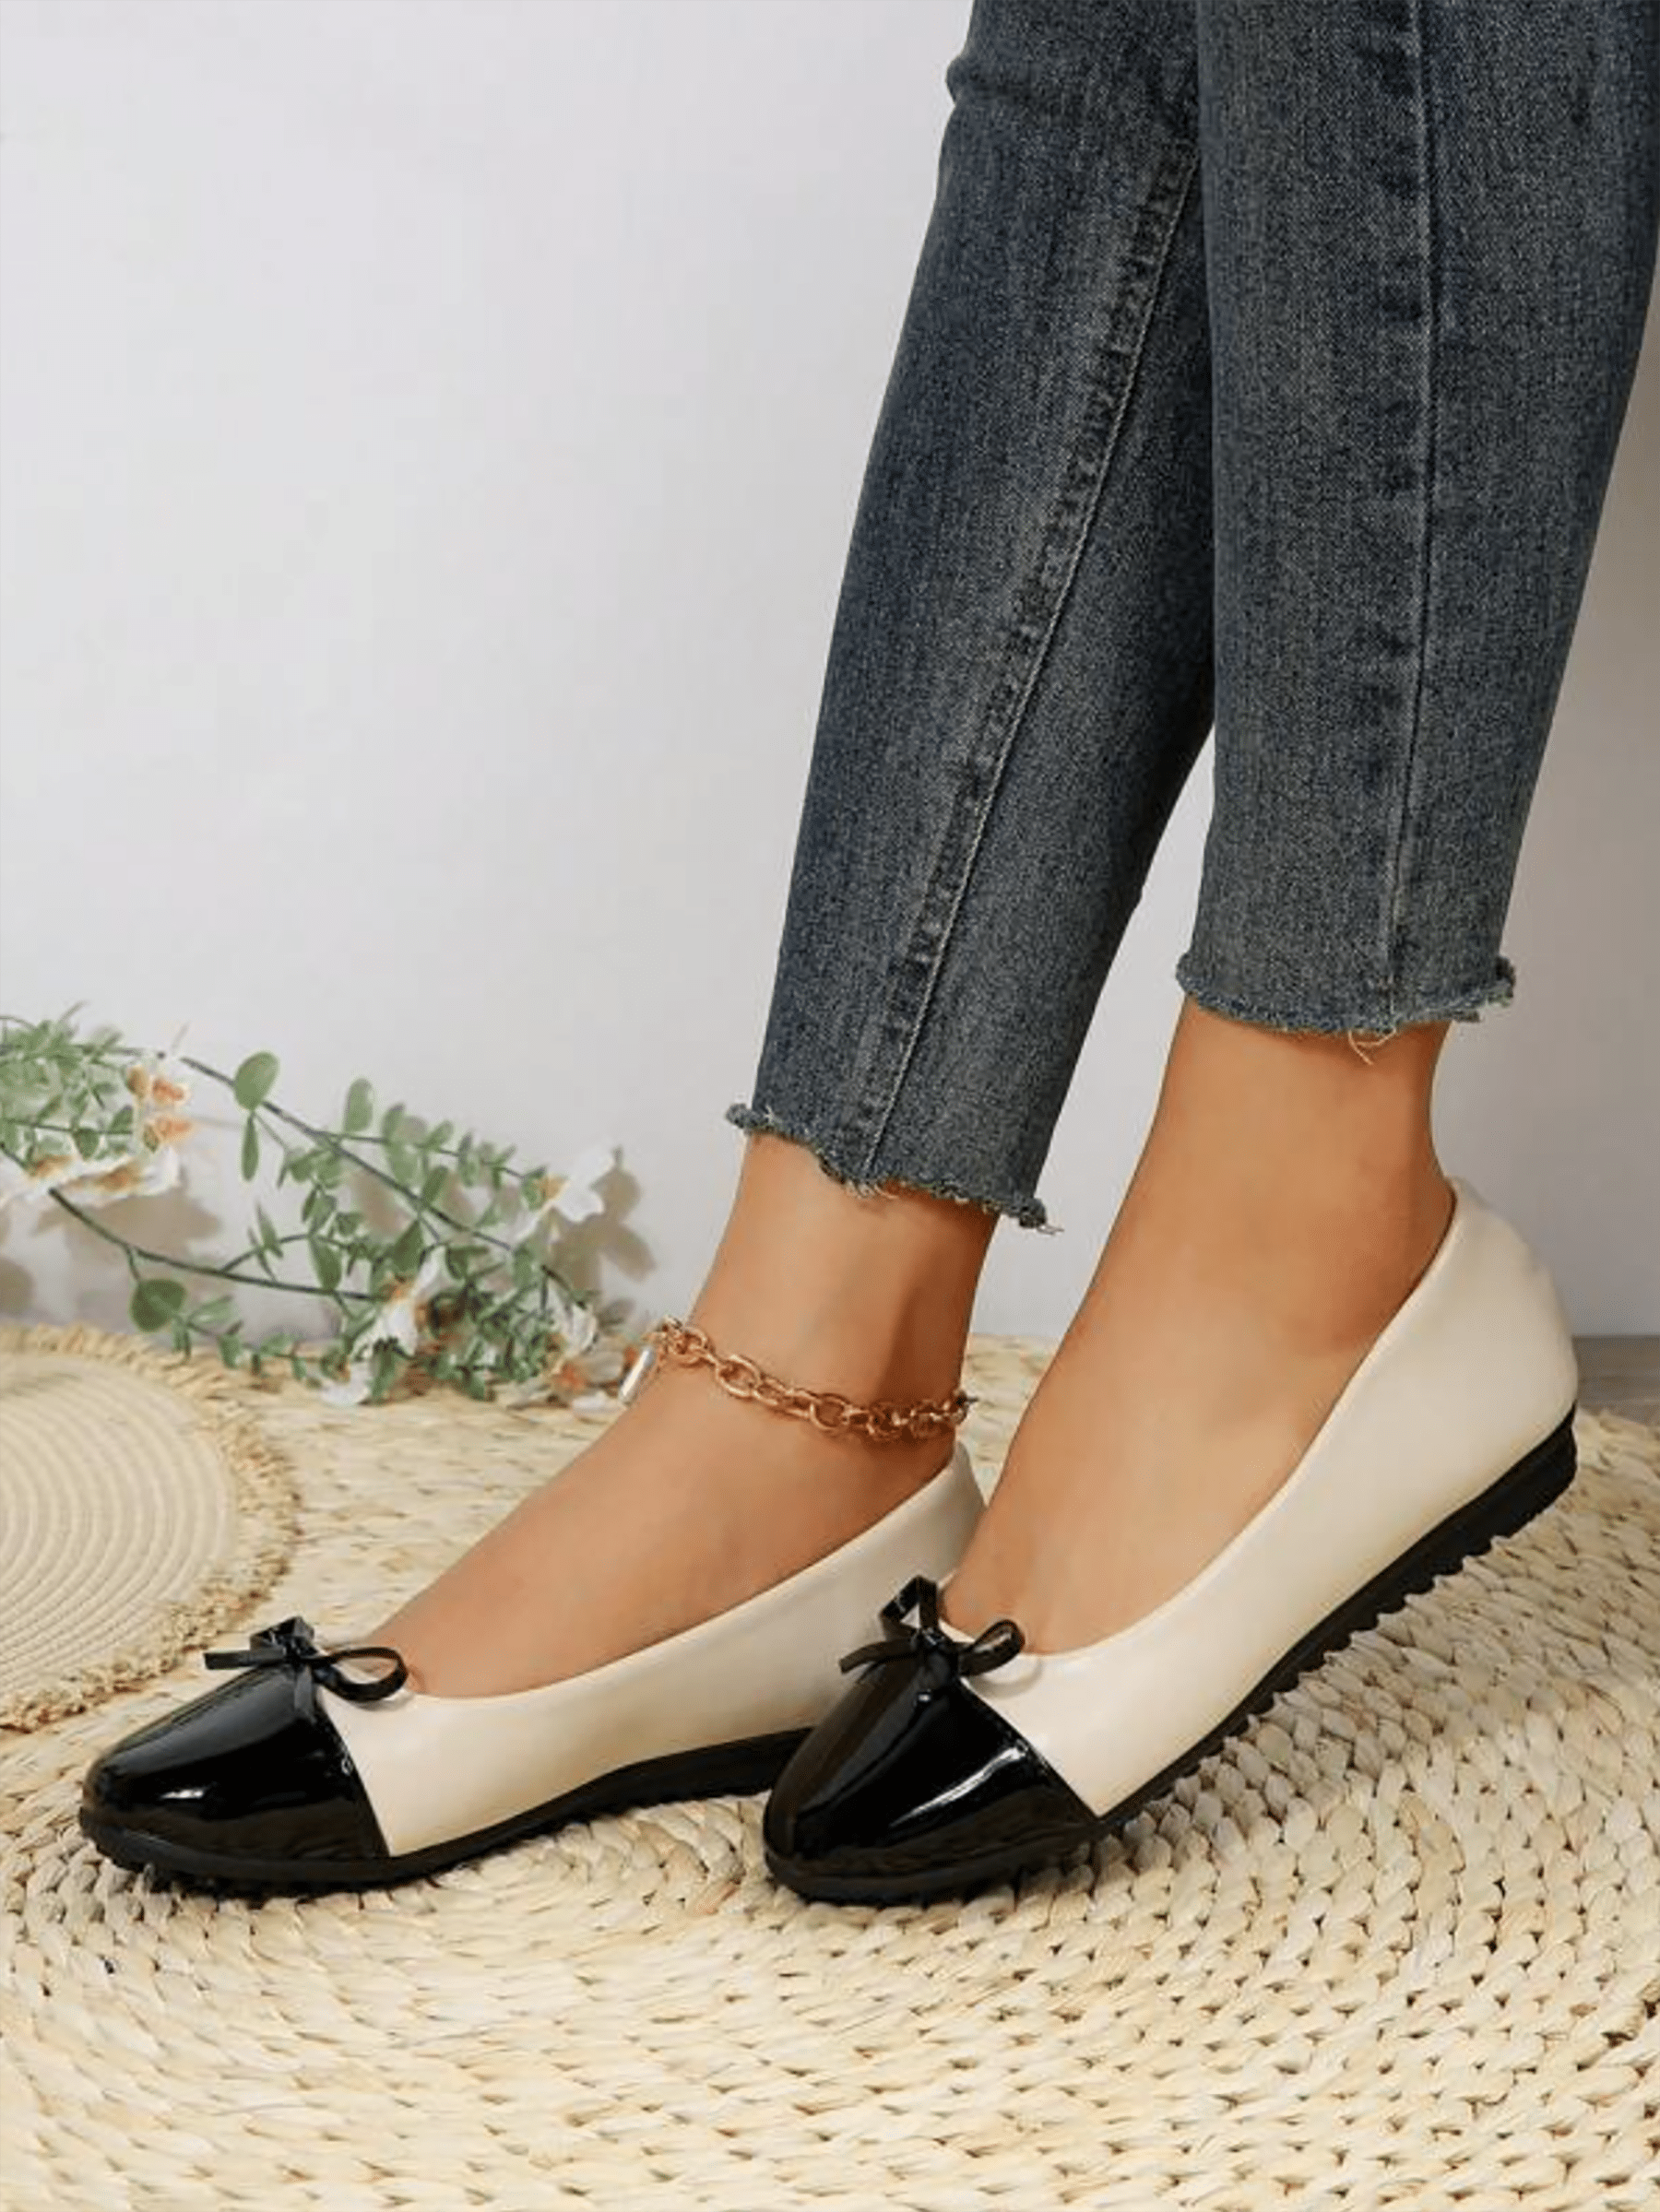 chanel style ballet flats